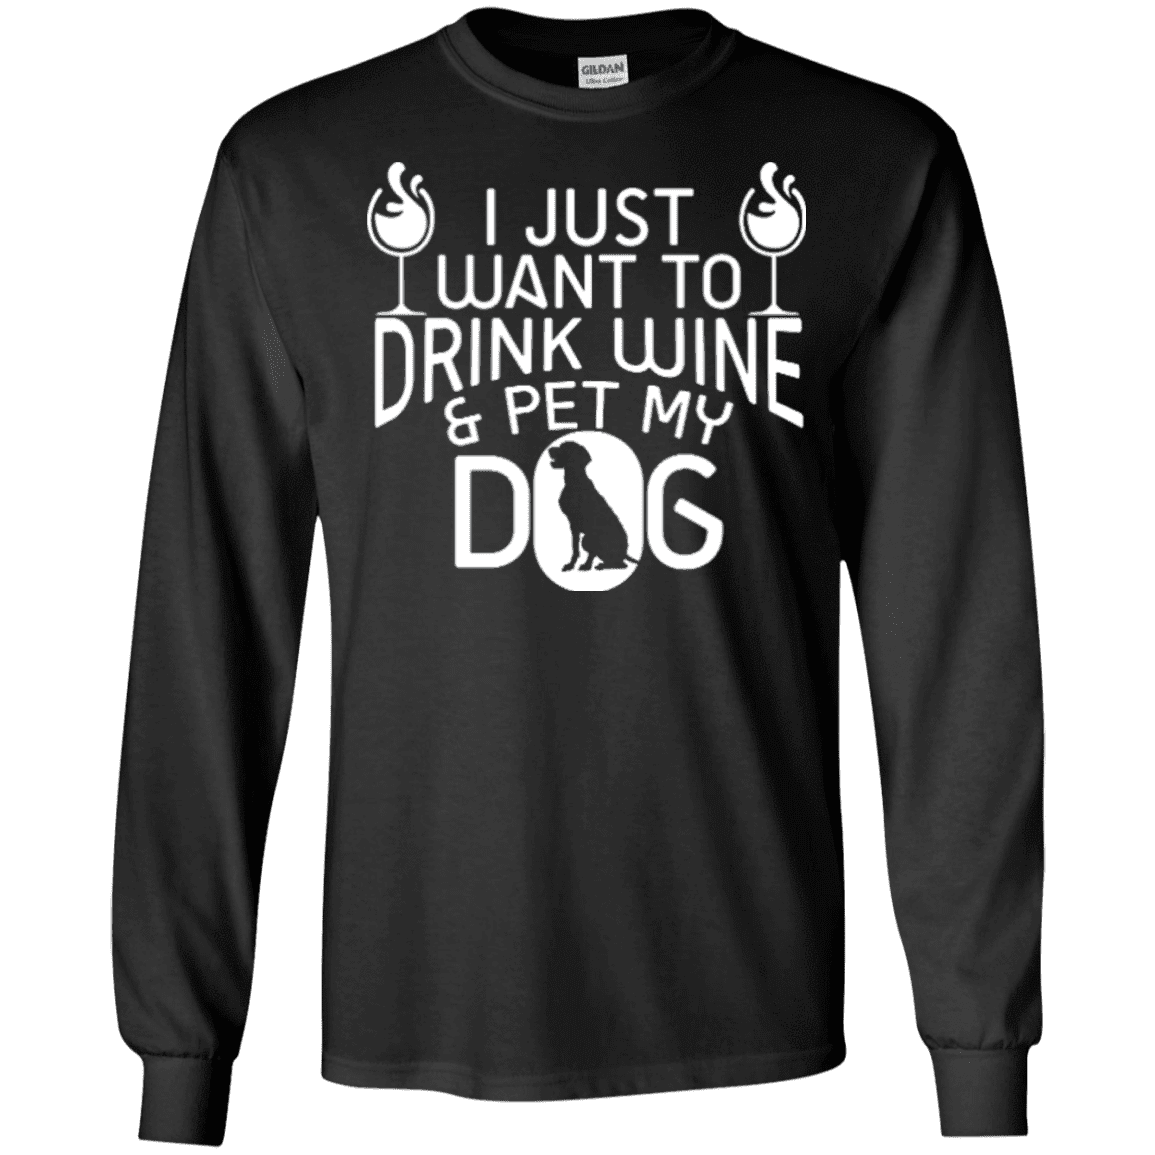 Drink Wine and Pet My Dog - Long Sleeve T Shirt.